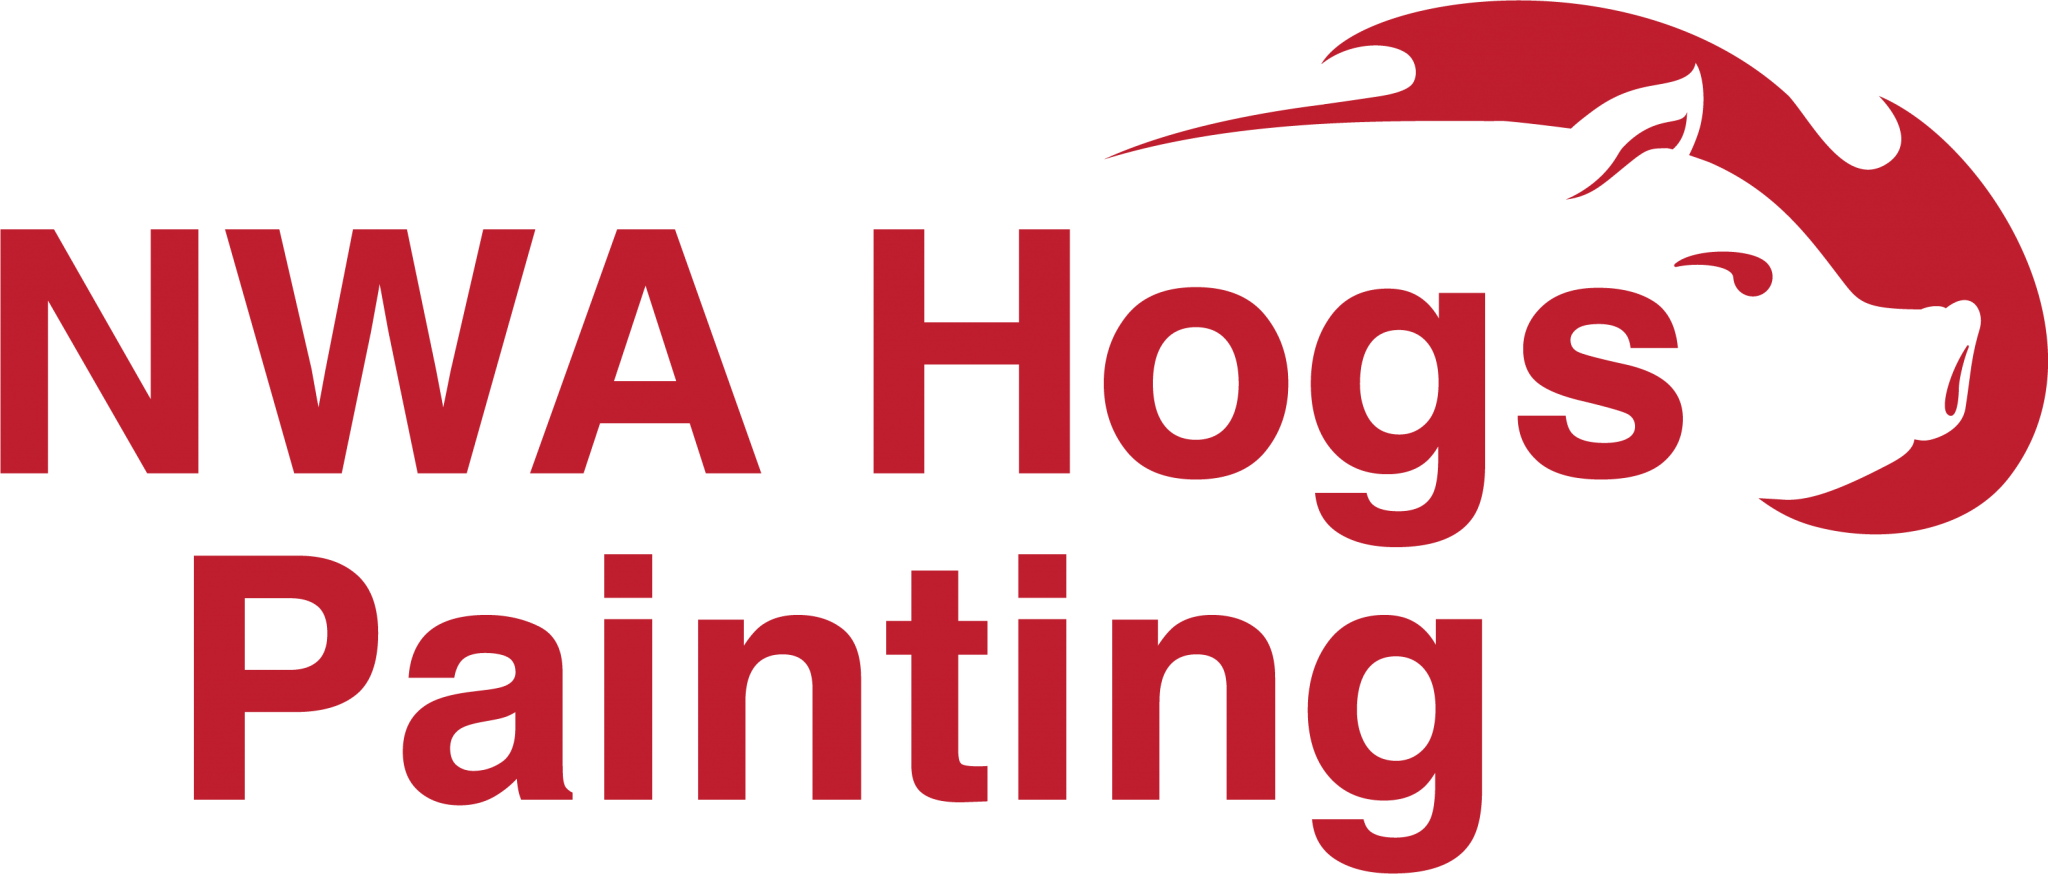 NWA Hogs Painting Announces Expansion to Decatur, AR